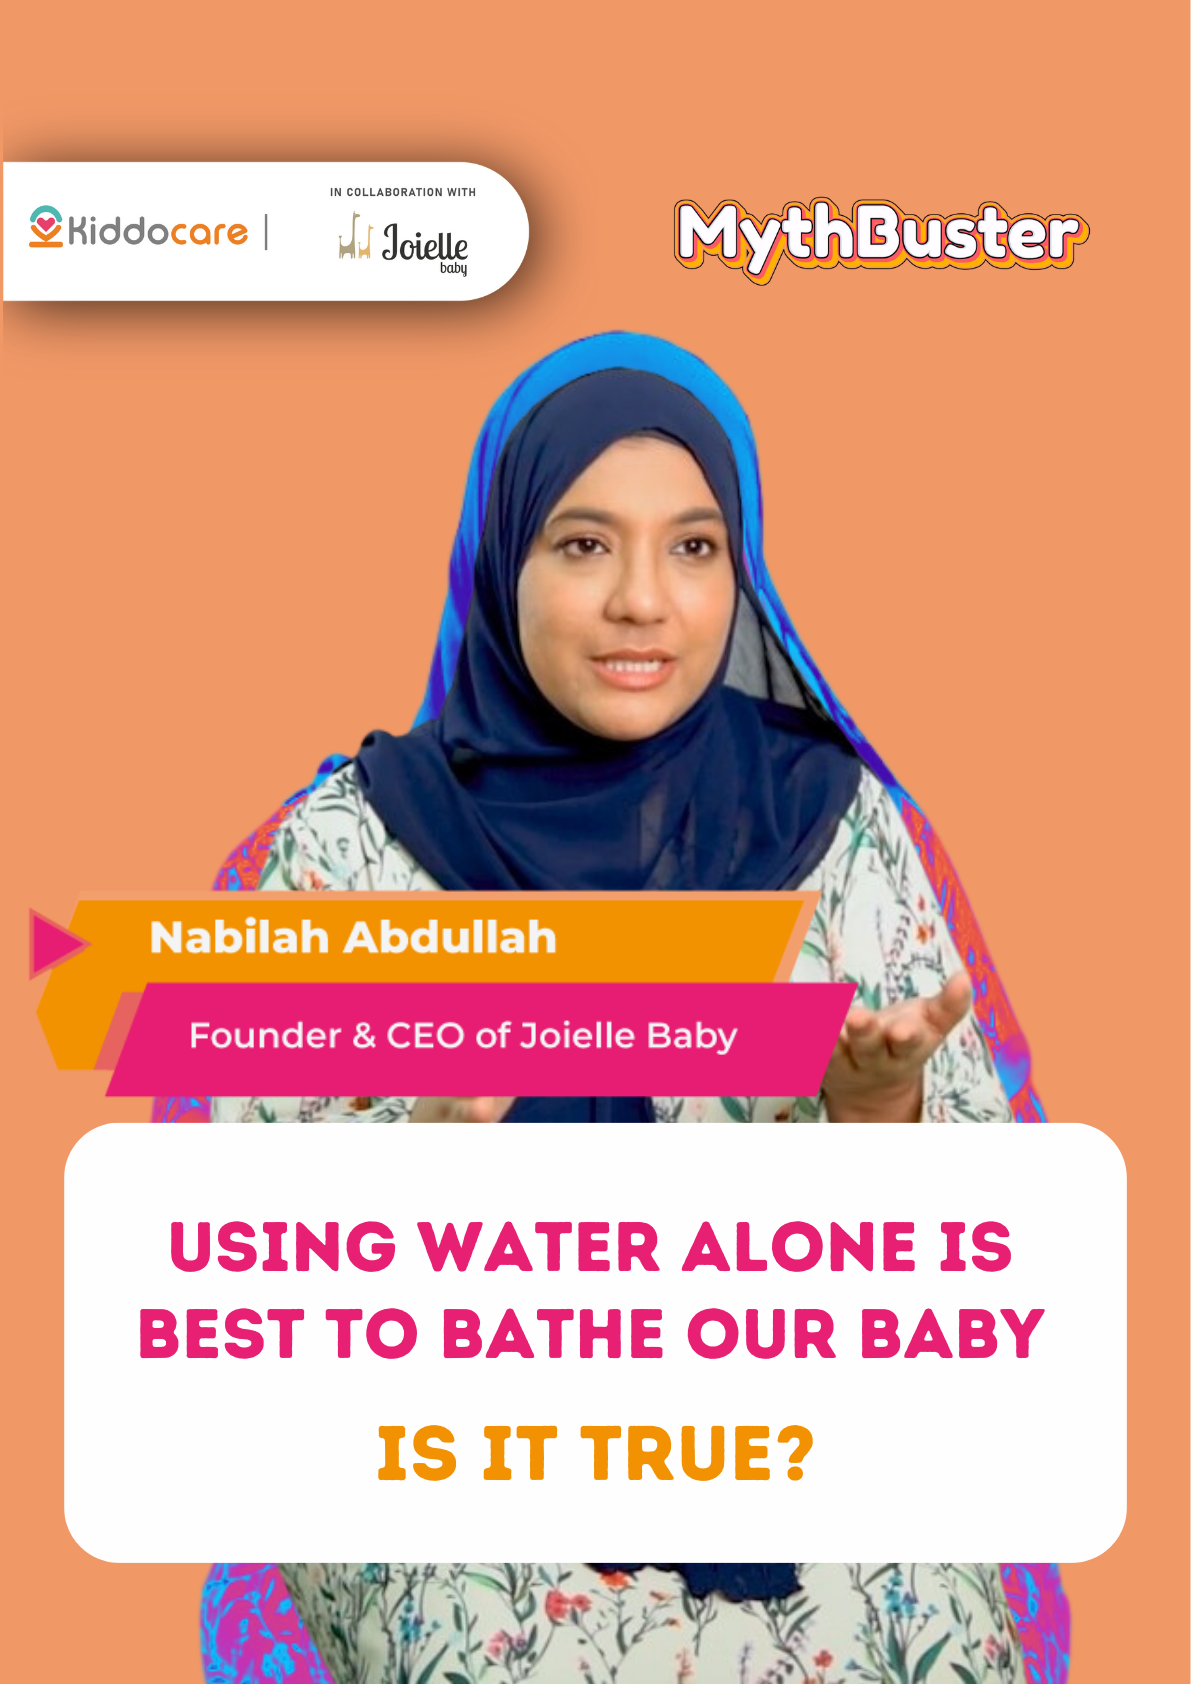 Mythbuster: Is it True that Using Water Alone is Best to Bathe Our Baby? Is it also True that We Need to bathe Our Newborn Every Day?